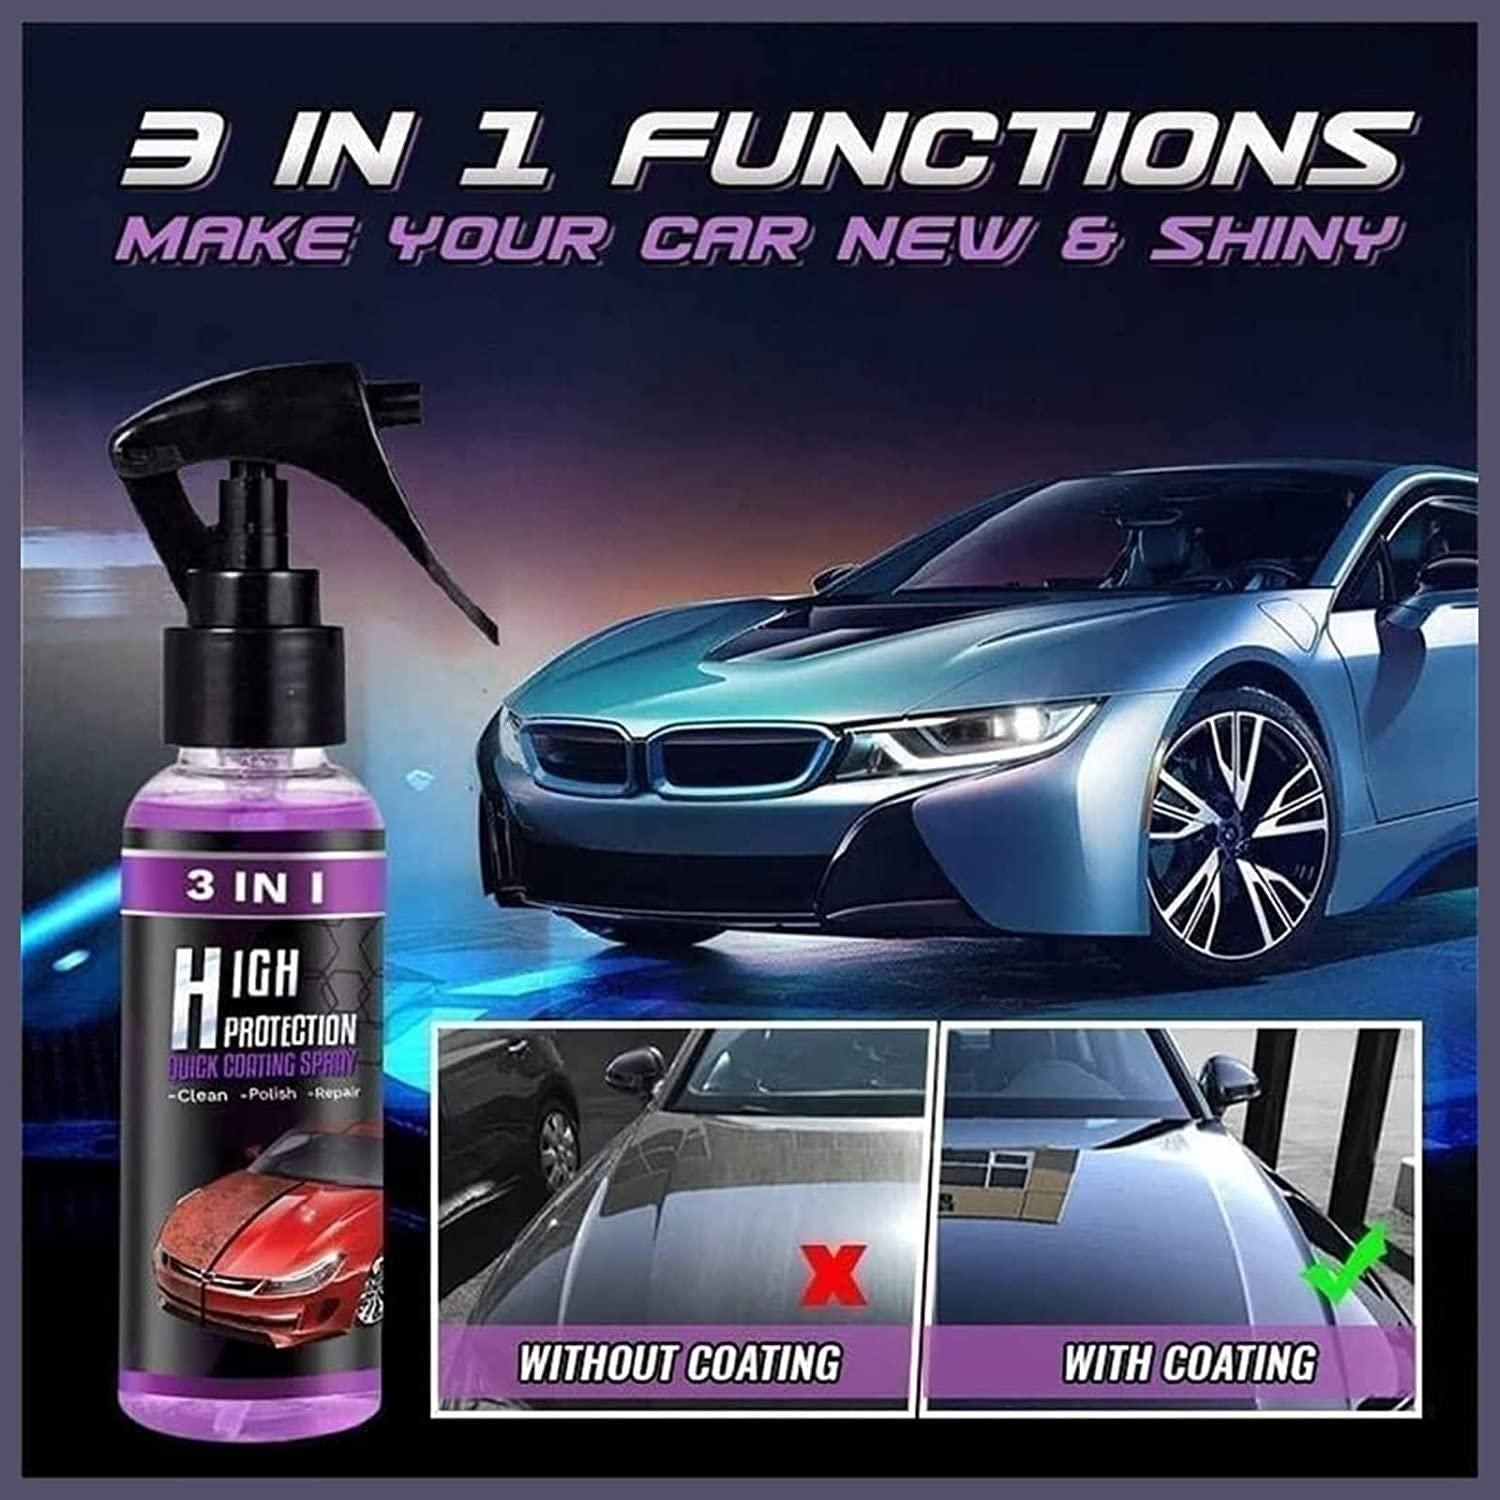 3 IN 1 HIGH PROTECTION CERAMIC COATING SPRAY – solution online